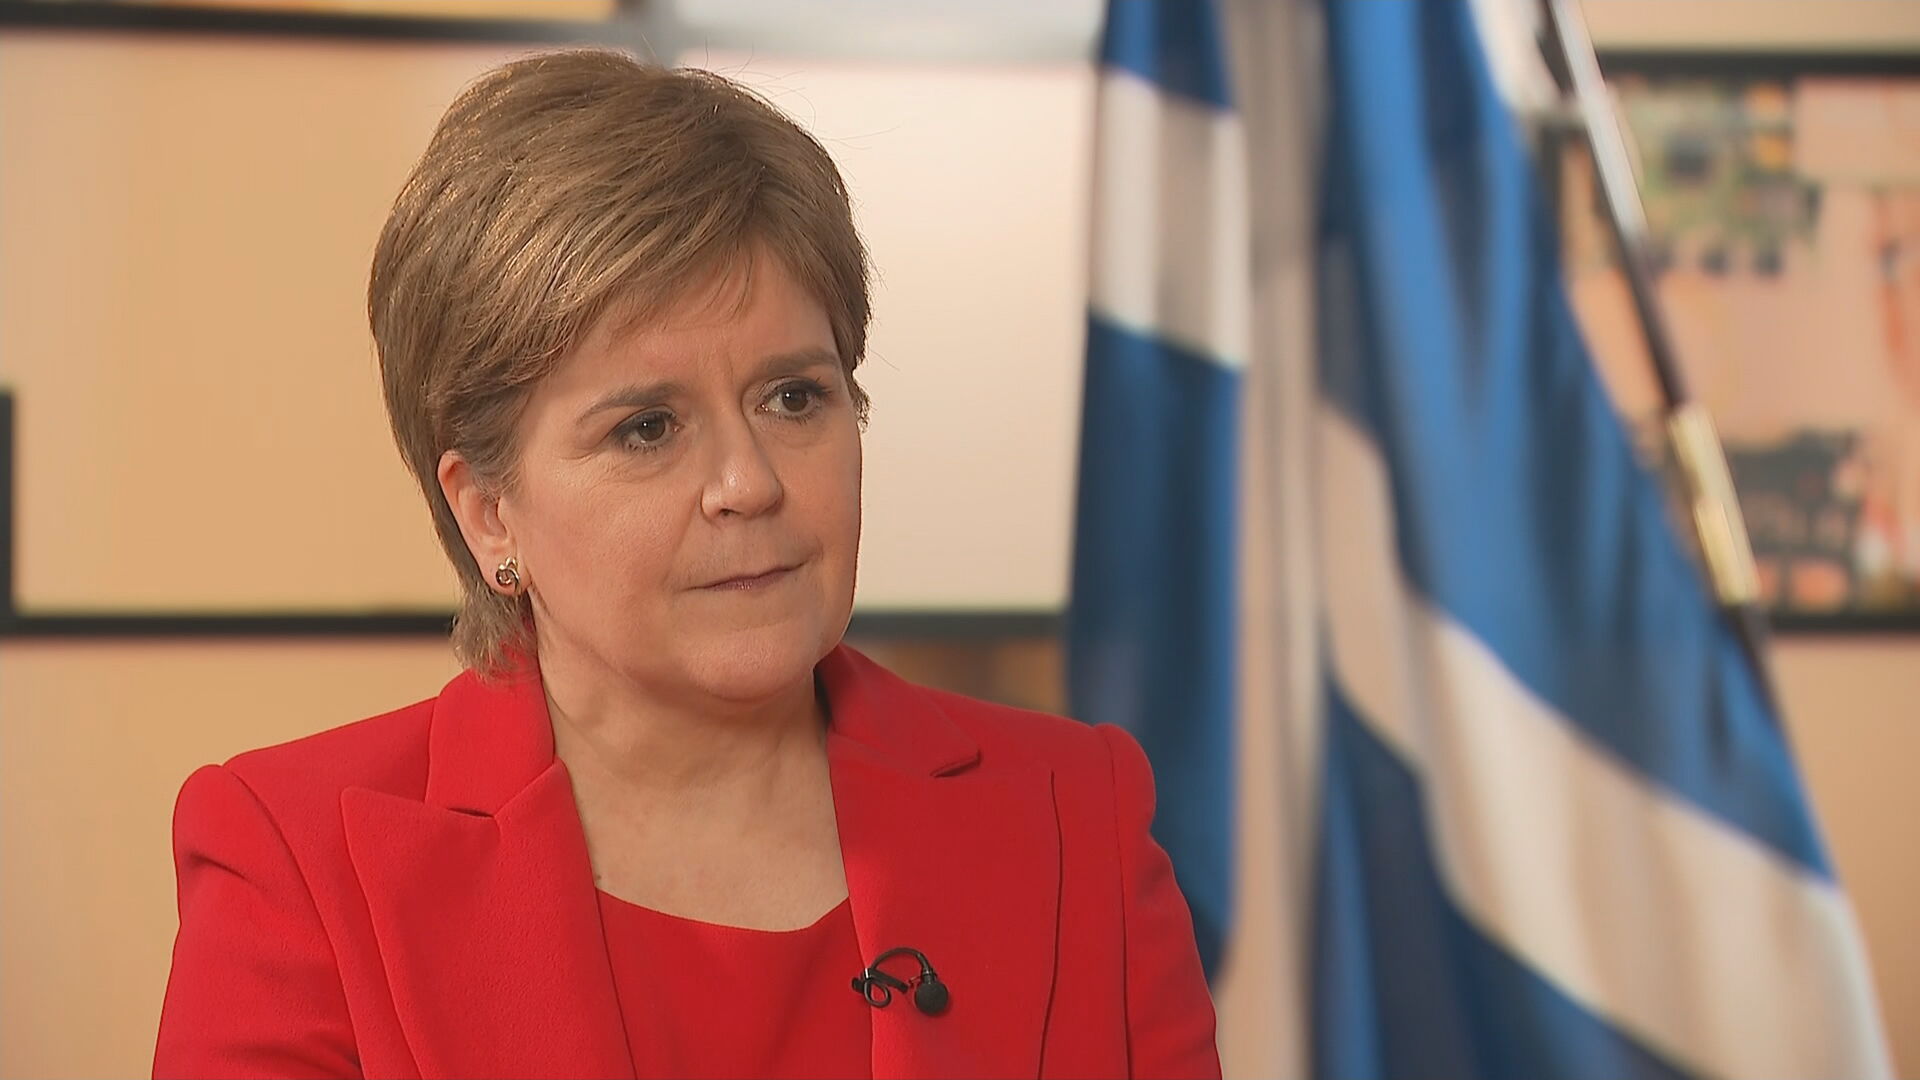 Nicola Sturgeon previously vowed to fully cooperate with any police investigation.